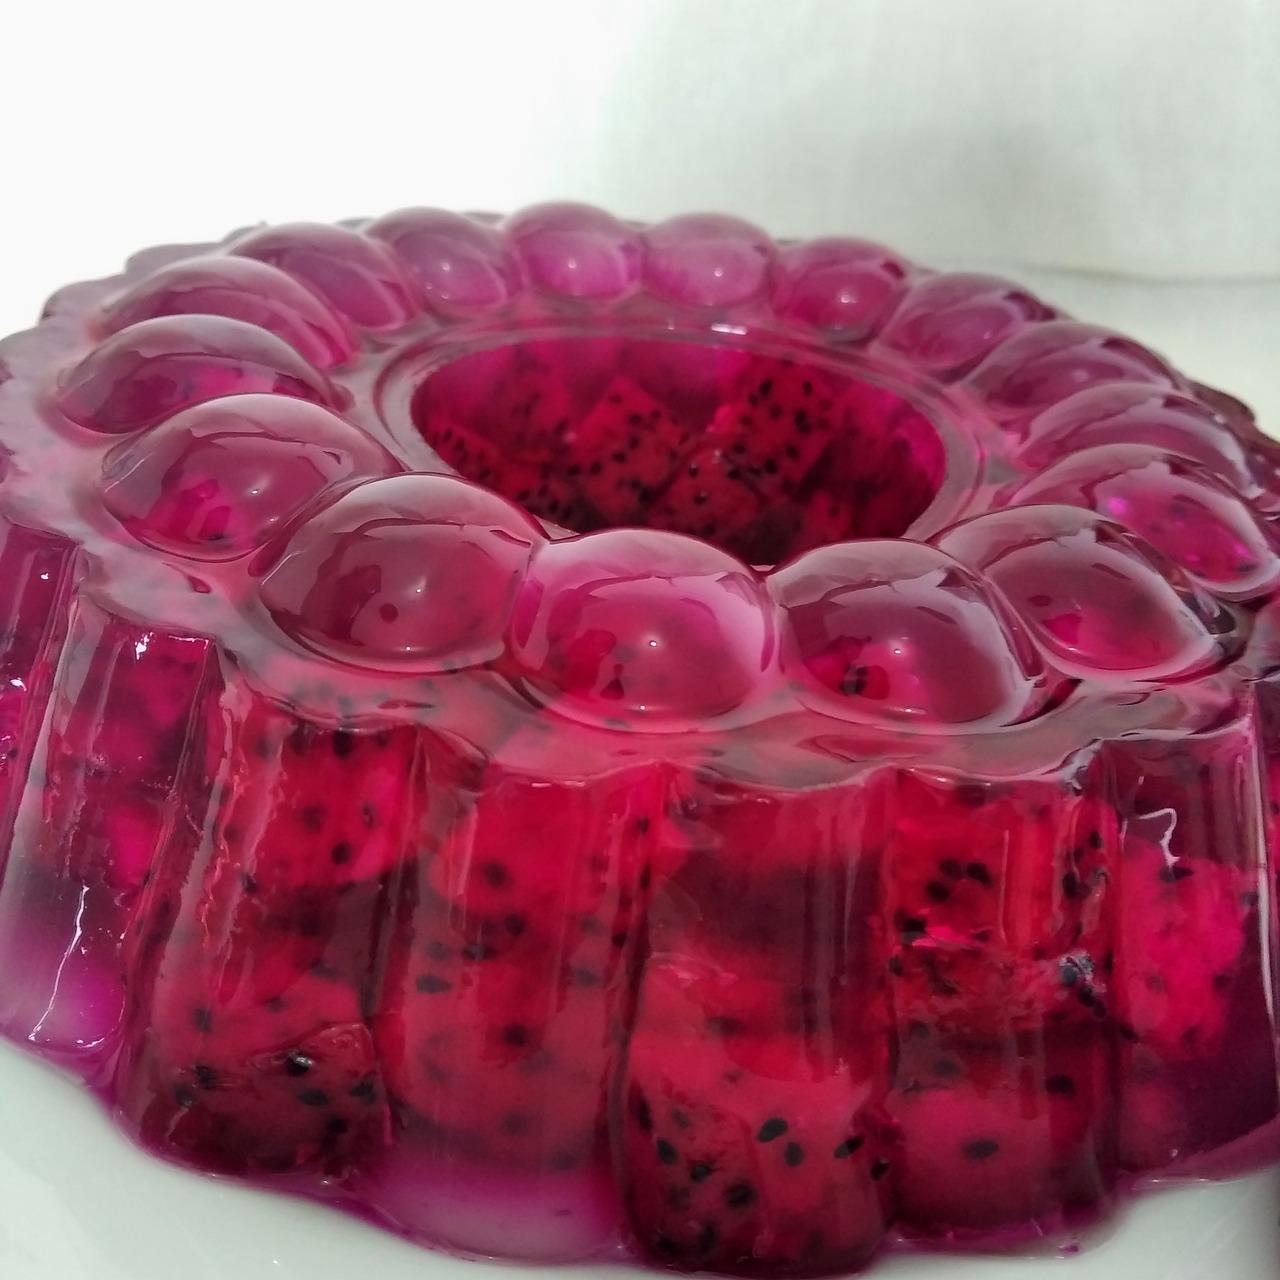 Can you make jello with just cold water? 